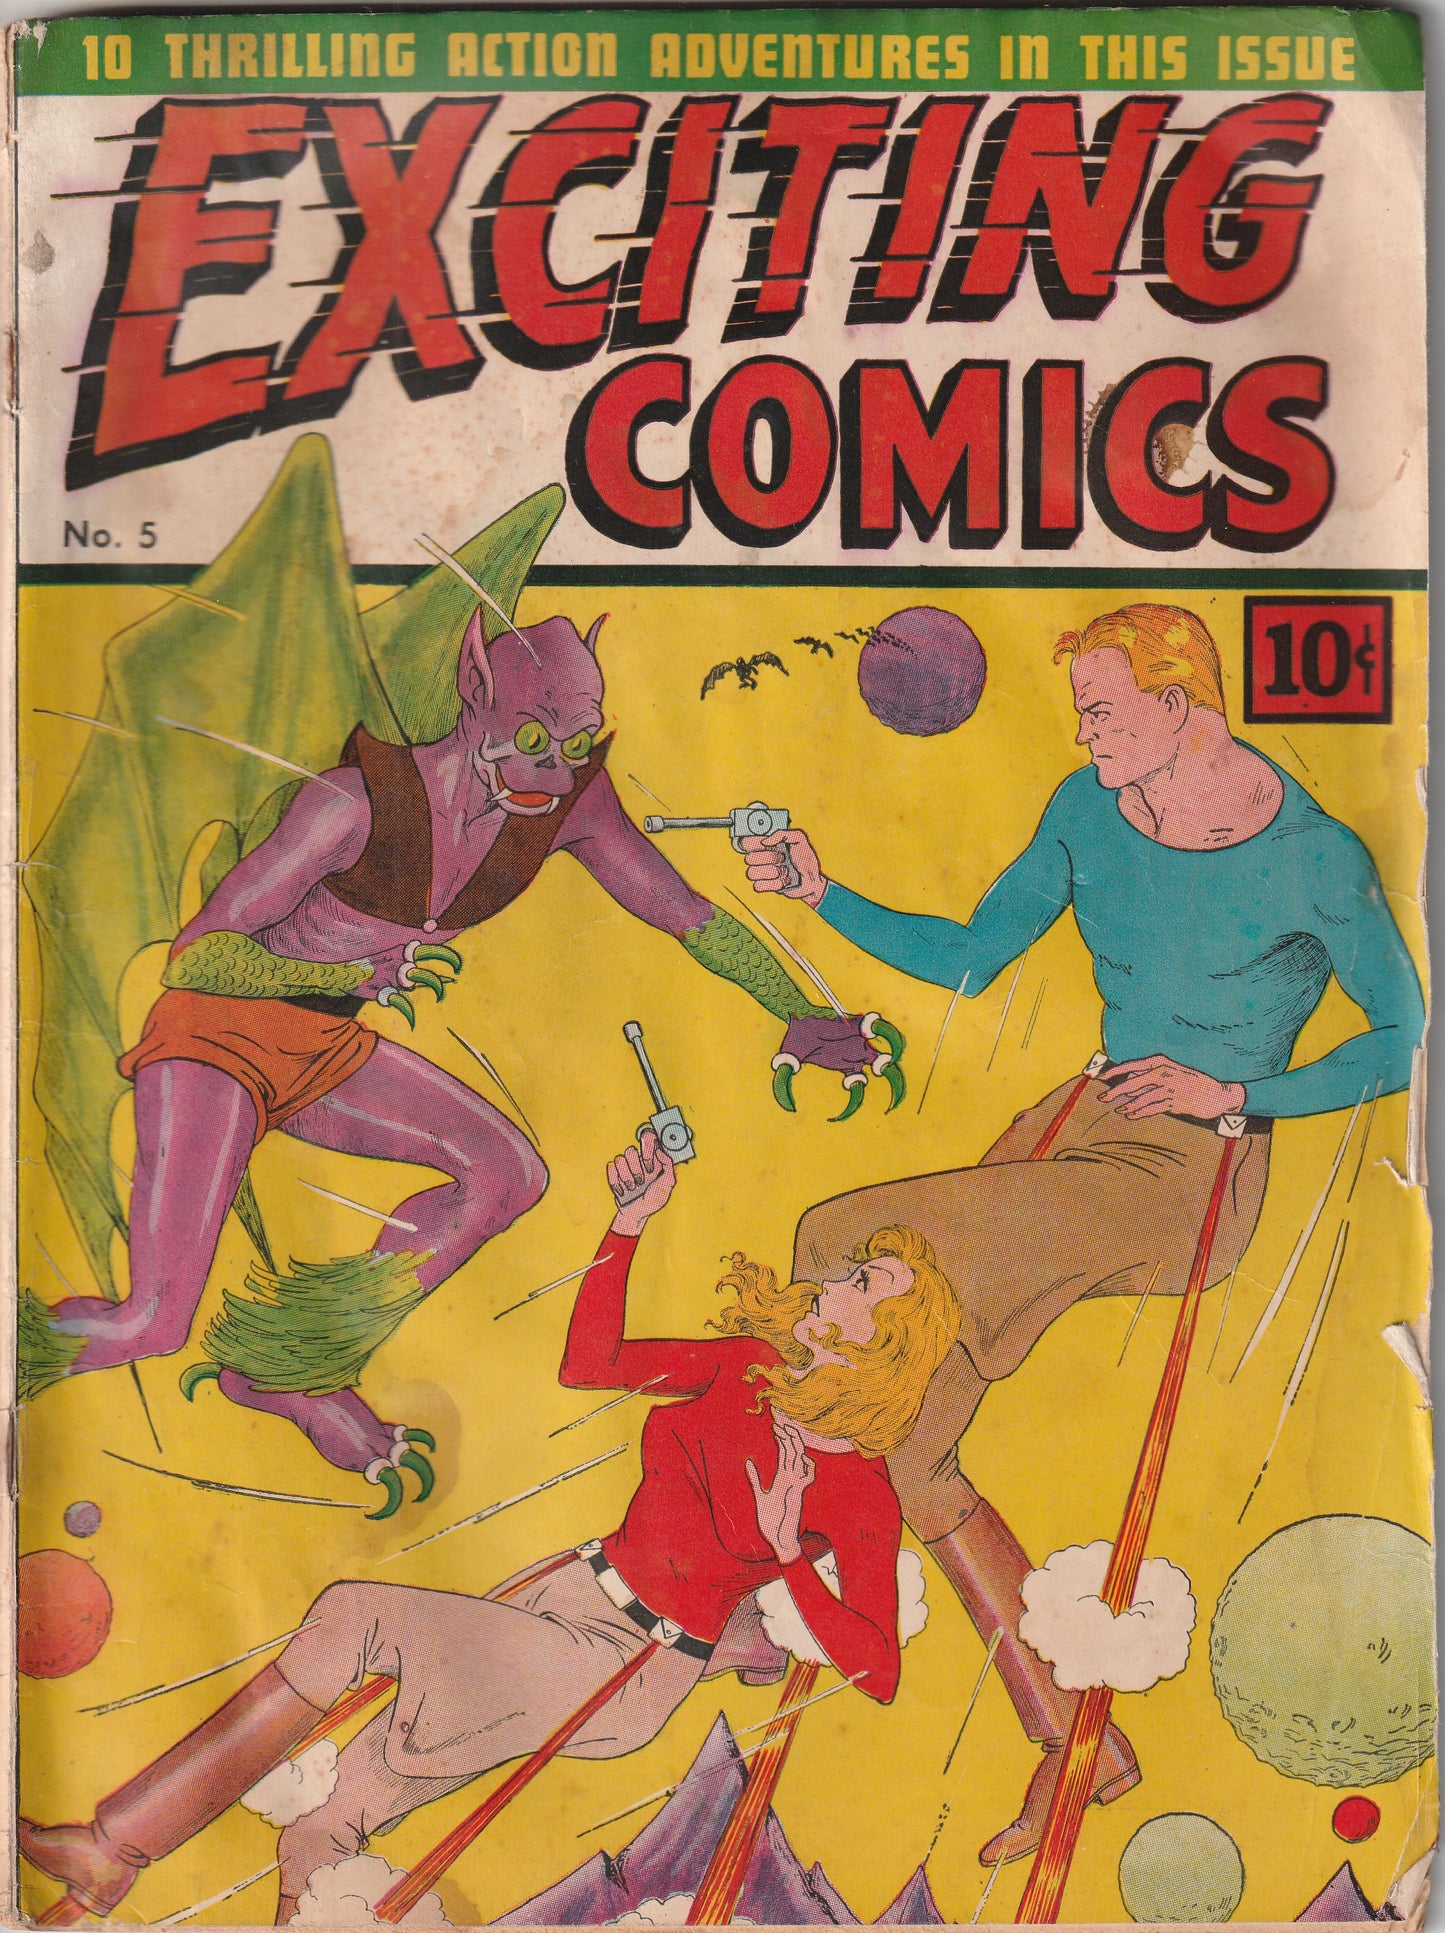 Exciting Comics #5 (1940) - Max Plaisted sci-fi cover